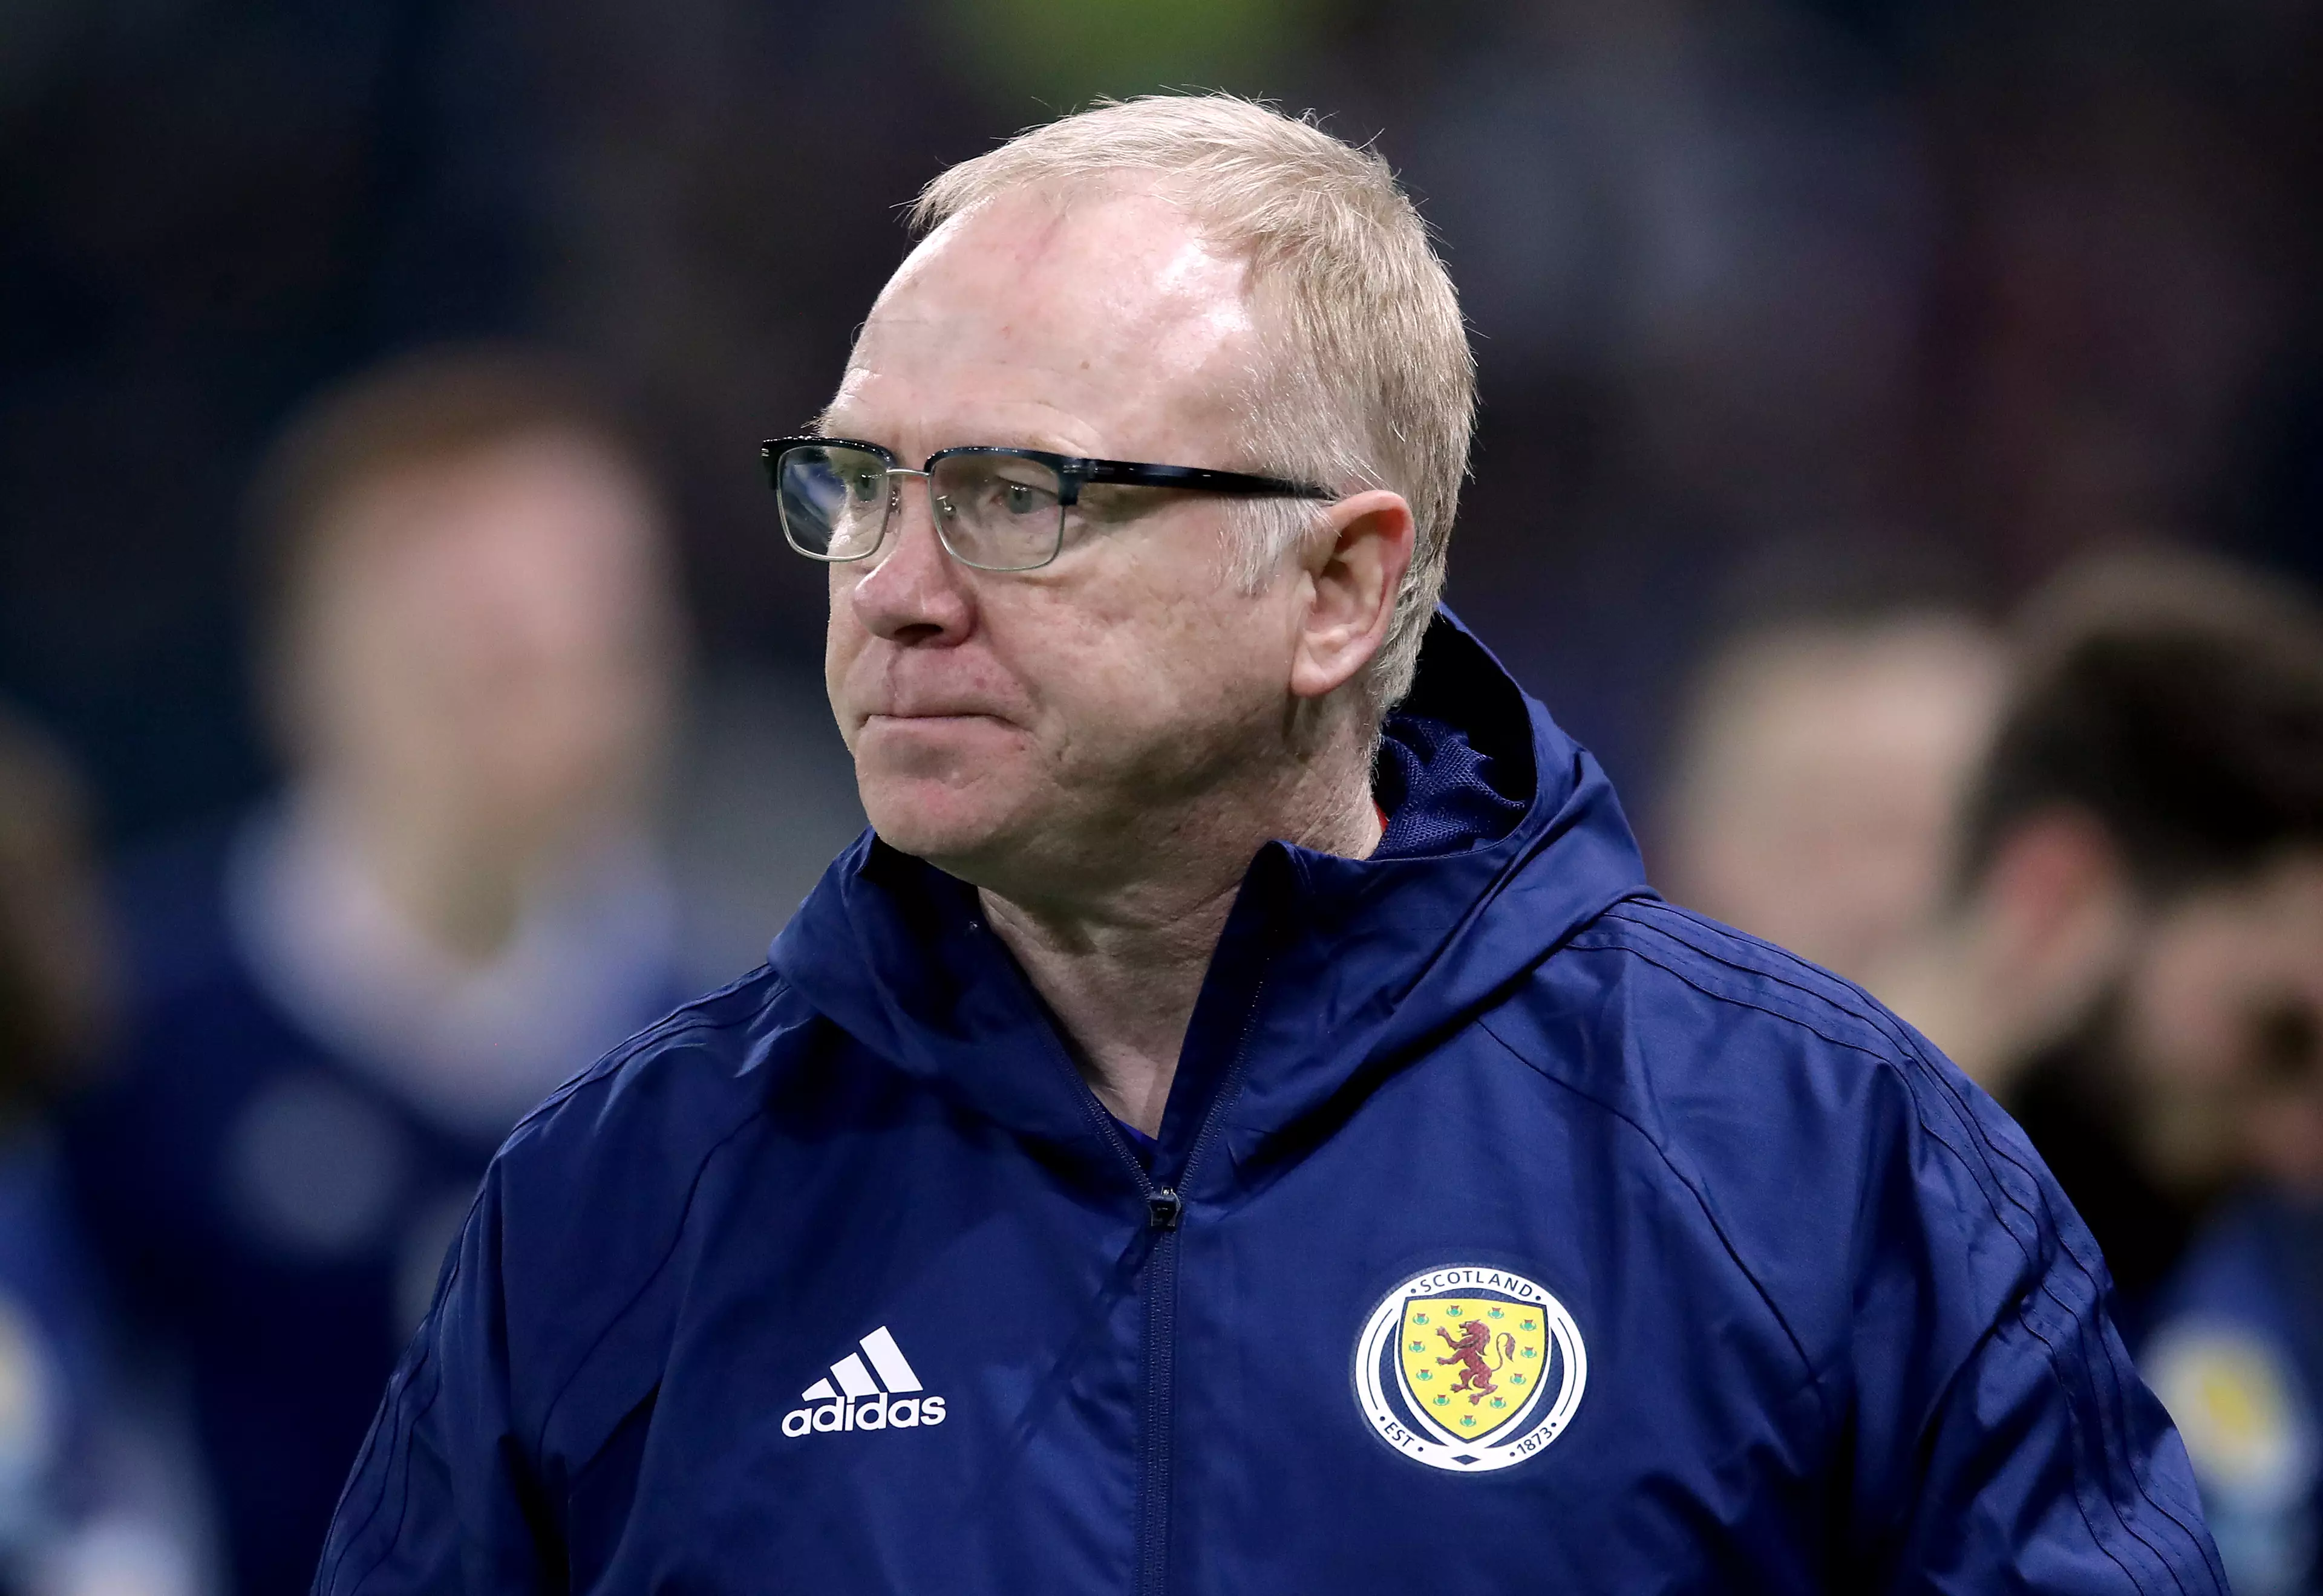 McLeish was in charge of Scotland for just over a year in his second tenure. Image: PA Images